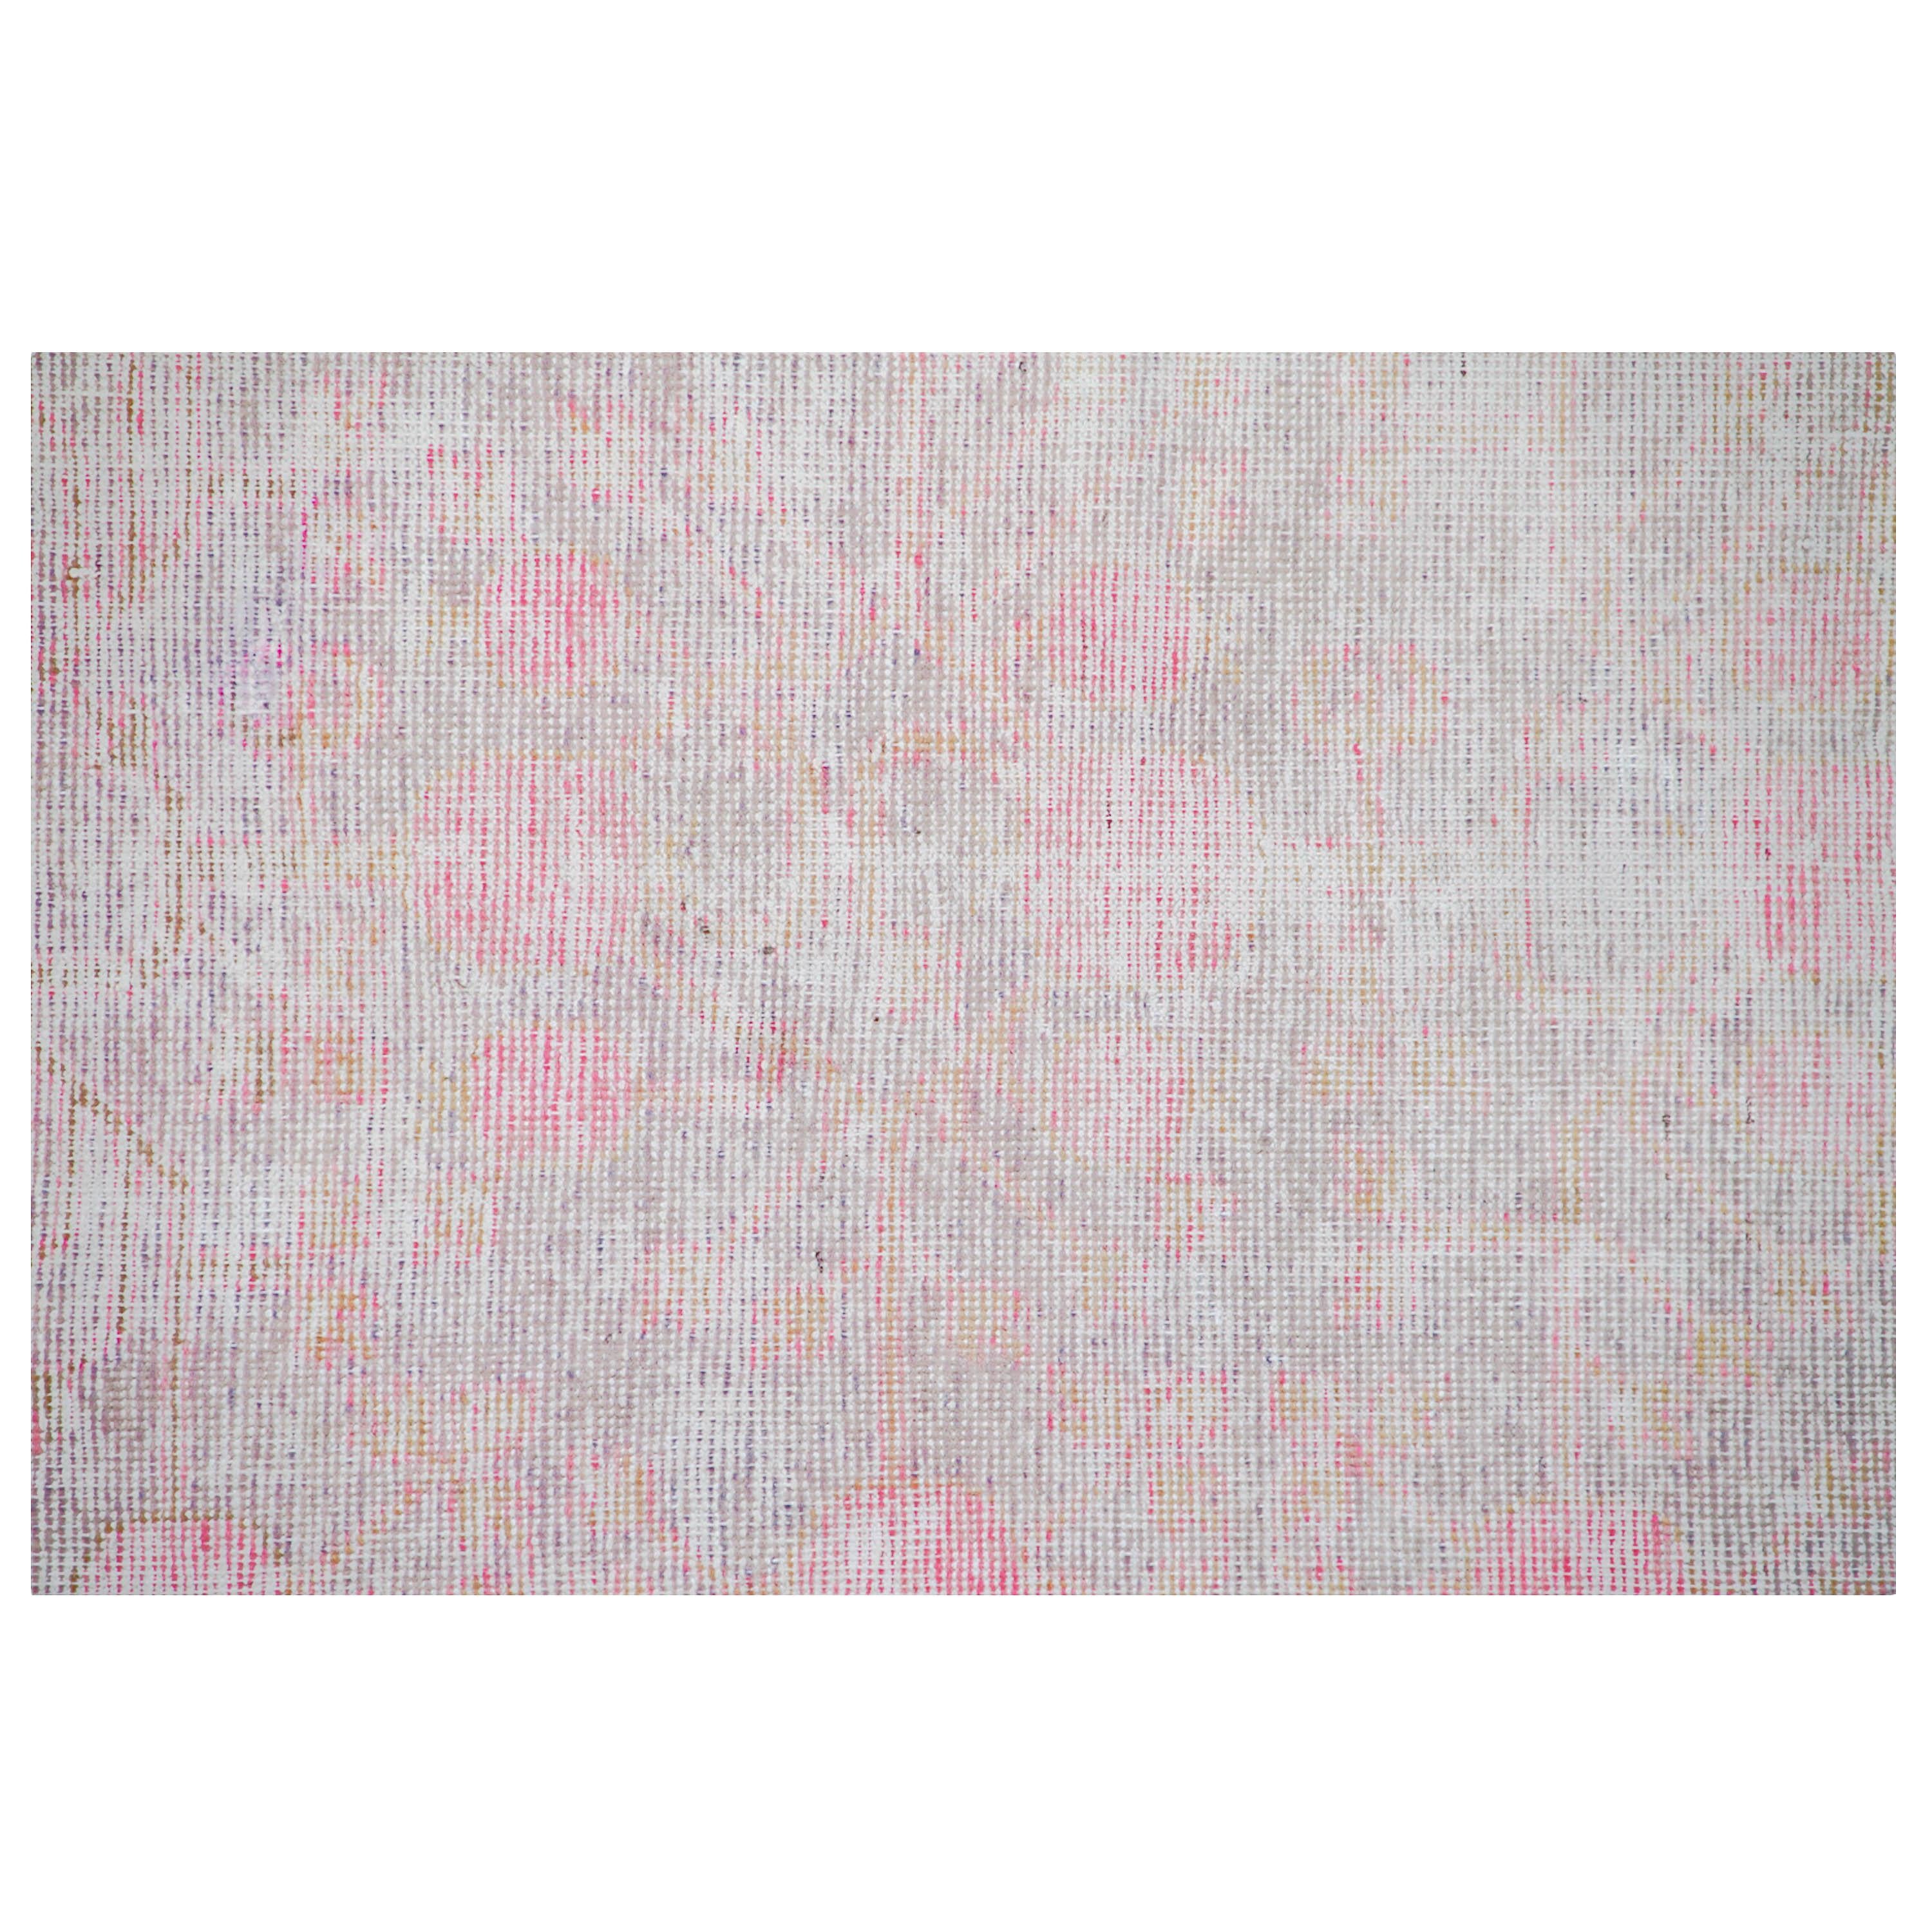 Sourced from the ancient Silk Road to bring a genuine one-of-a-kind rug to your home, this Pink Vintage Wool Cotton Blend Runner - 3'1